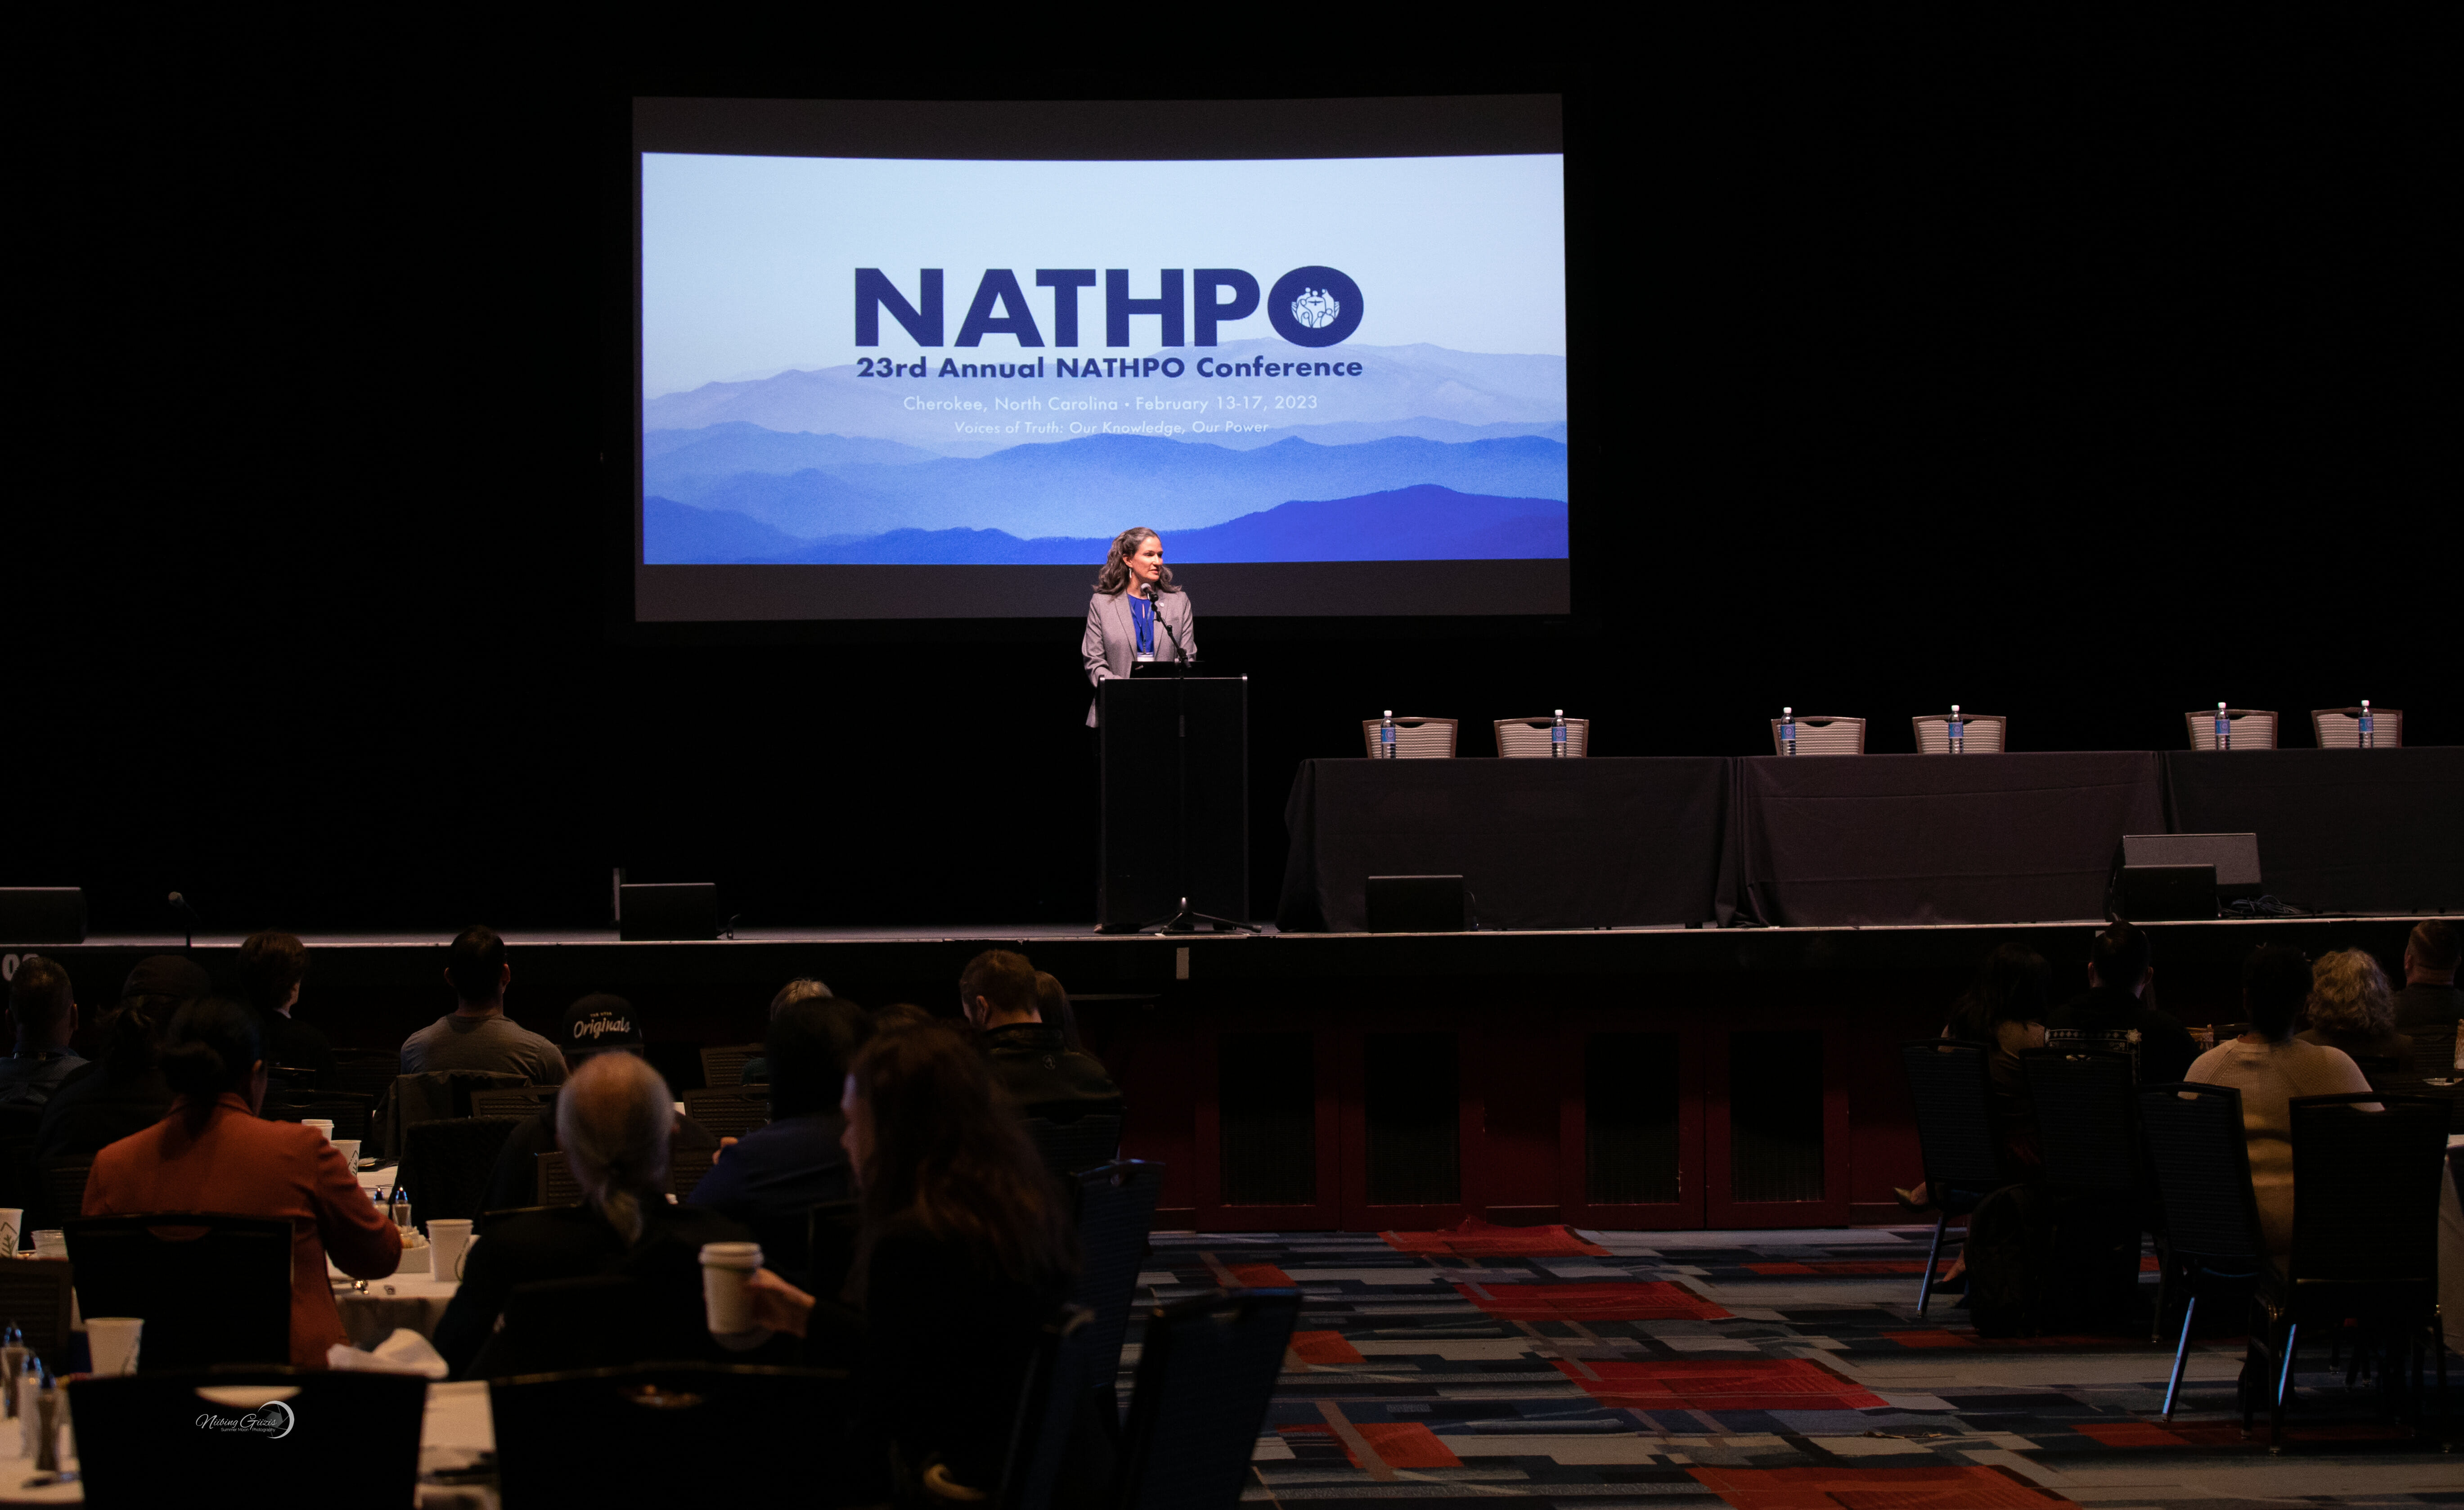 Dr. Valerie Grussing presenting at the 23rd Annual NATHPO Conference. Photo credit: Niibing Giizis, Marcella Hadden